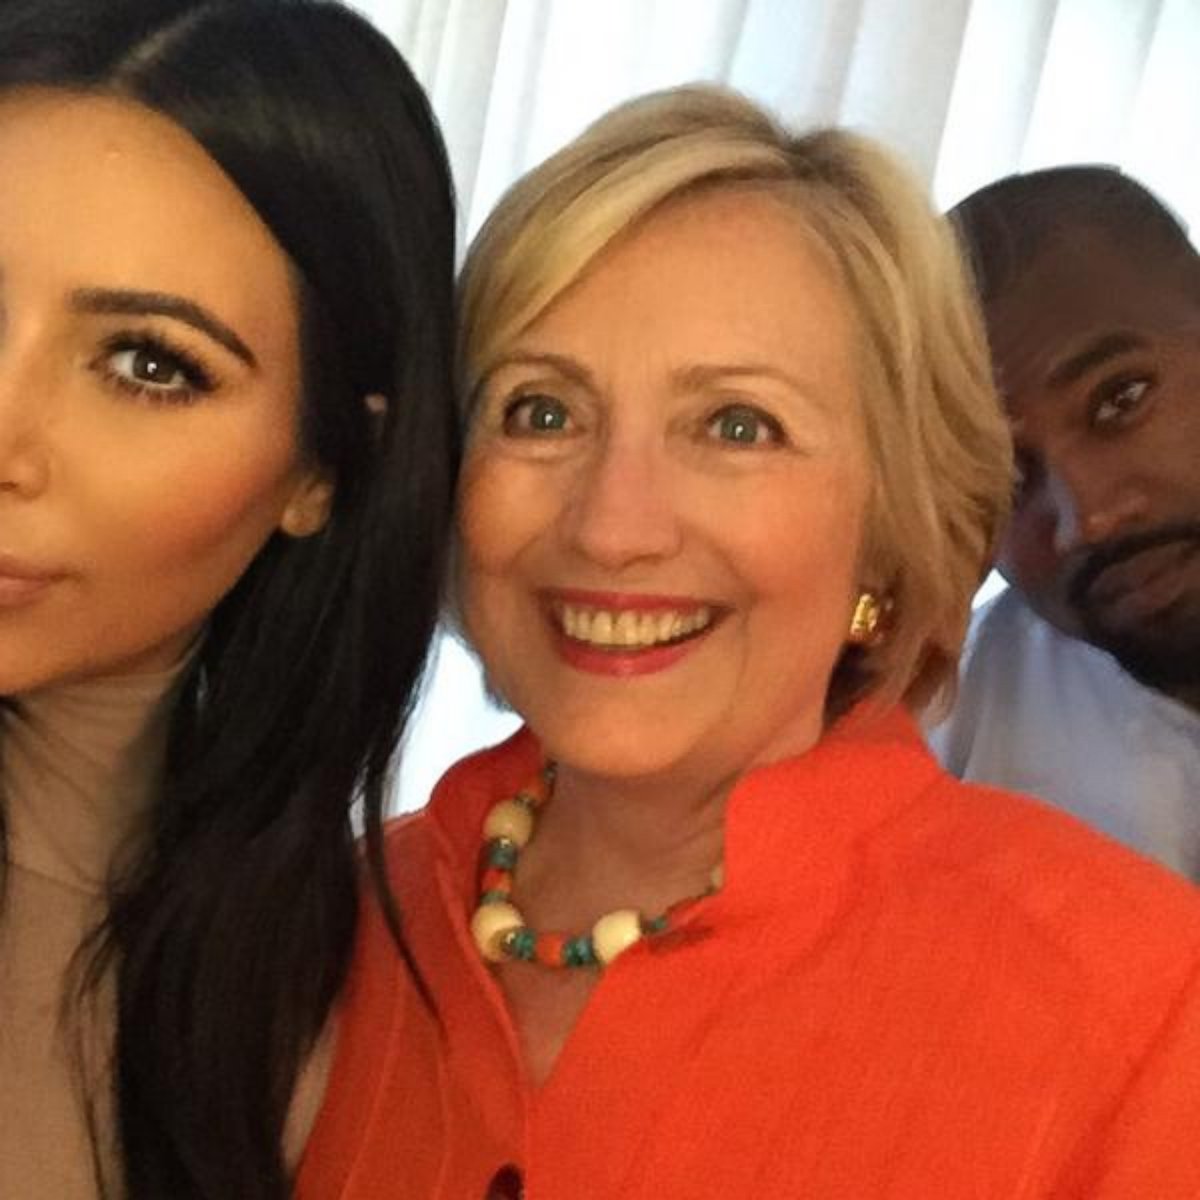 Kim Kardashian tweeted this photo on August 7, 2015, with the caption, "I got my selfie!!! I really loved hearing her speak & hearing her goals for our country! #HillaryForPresident."